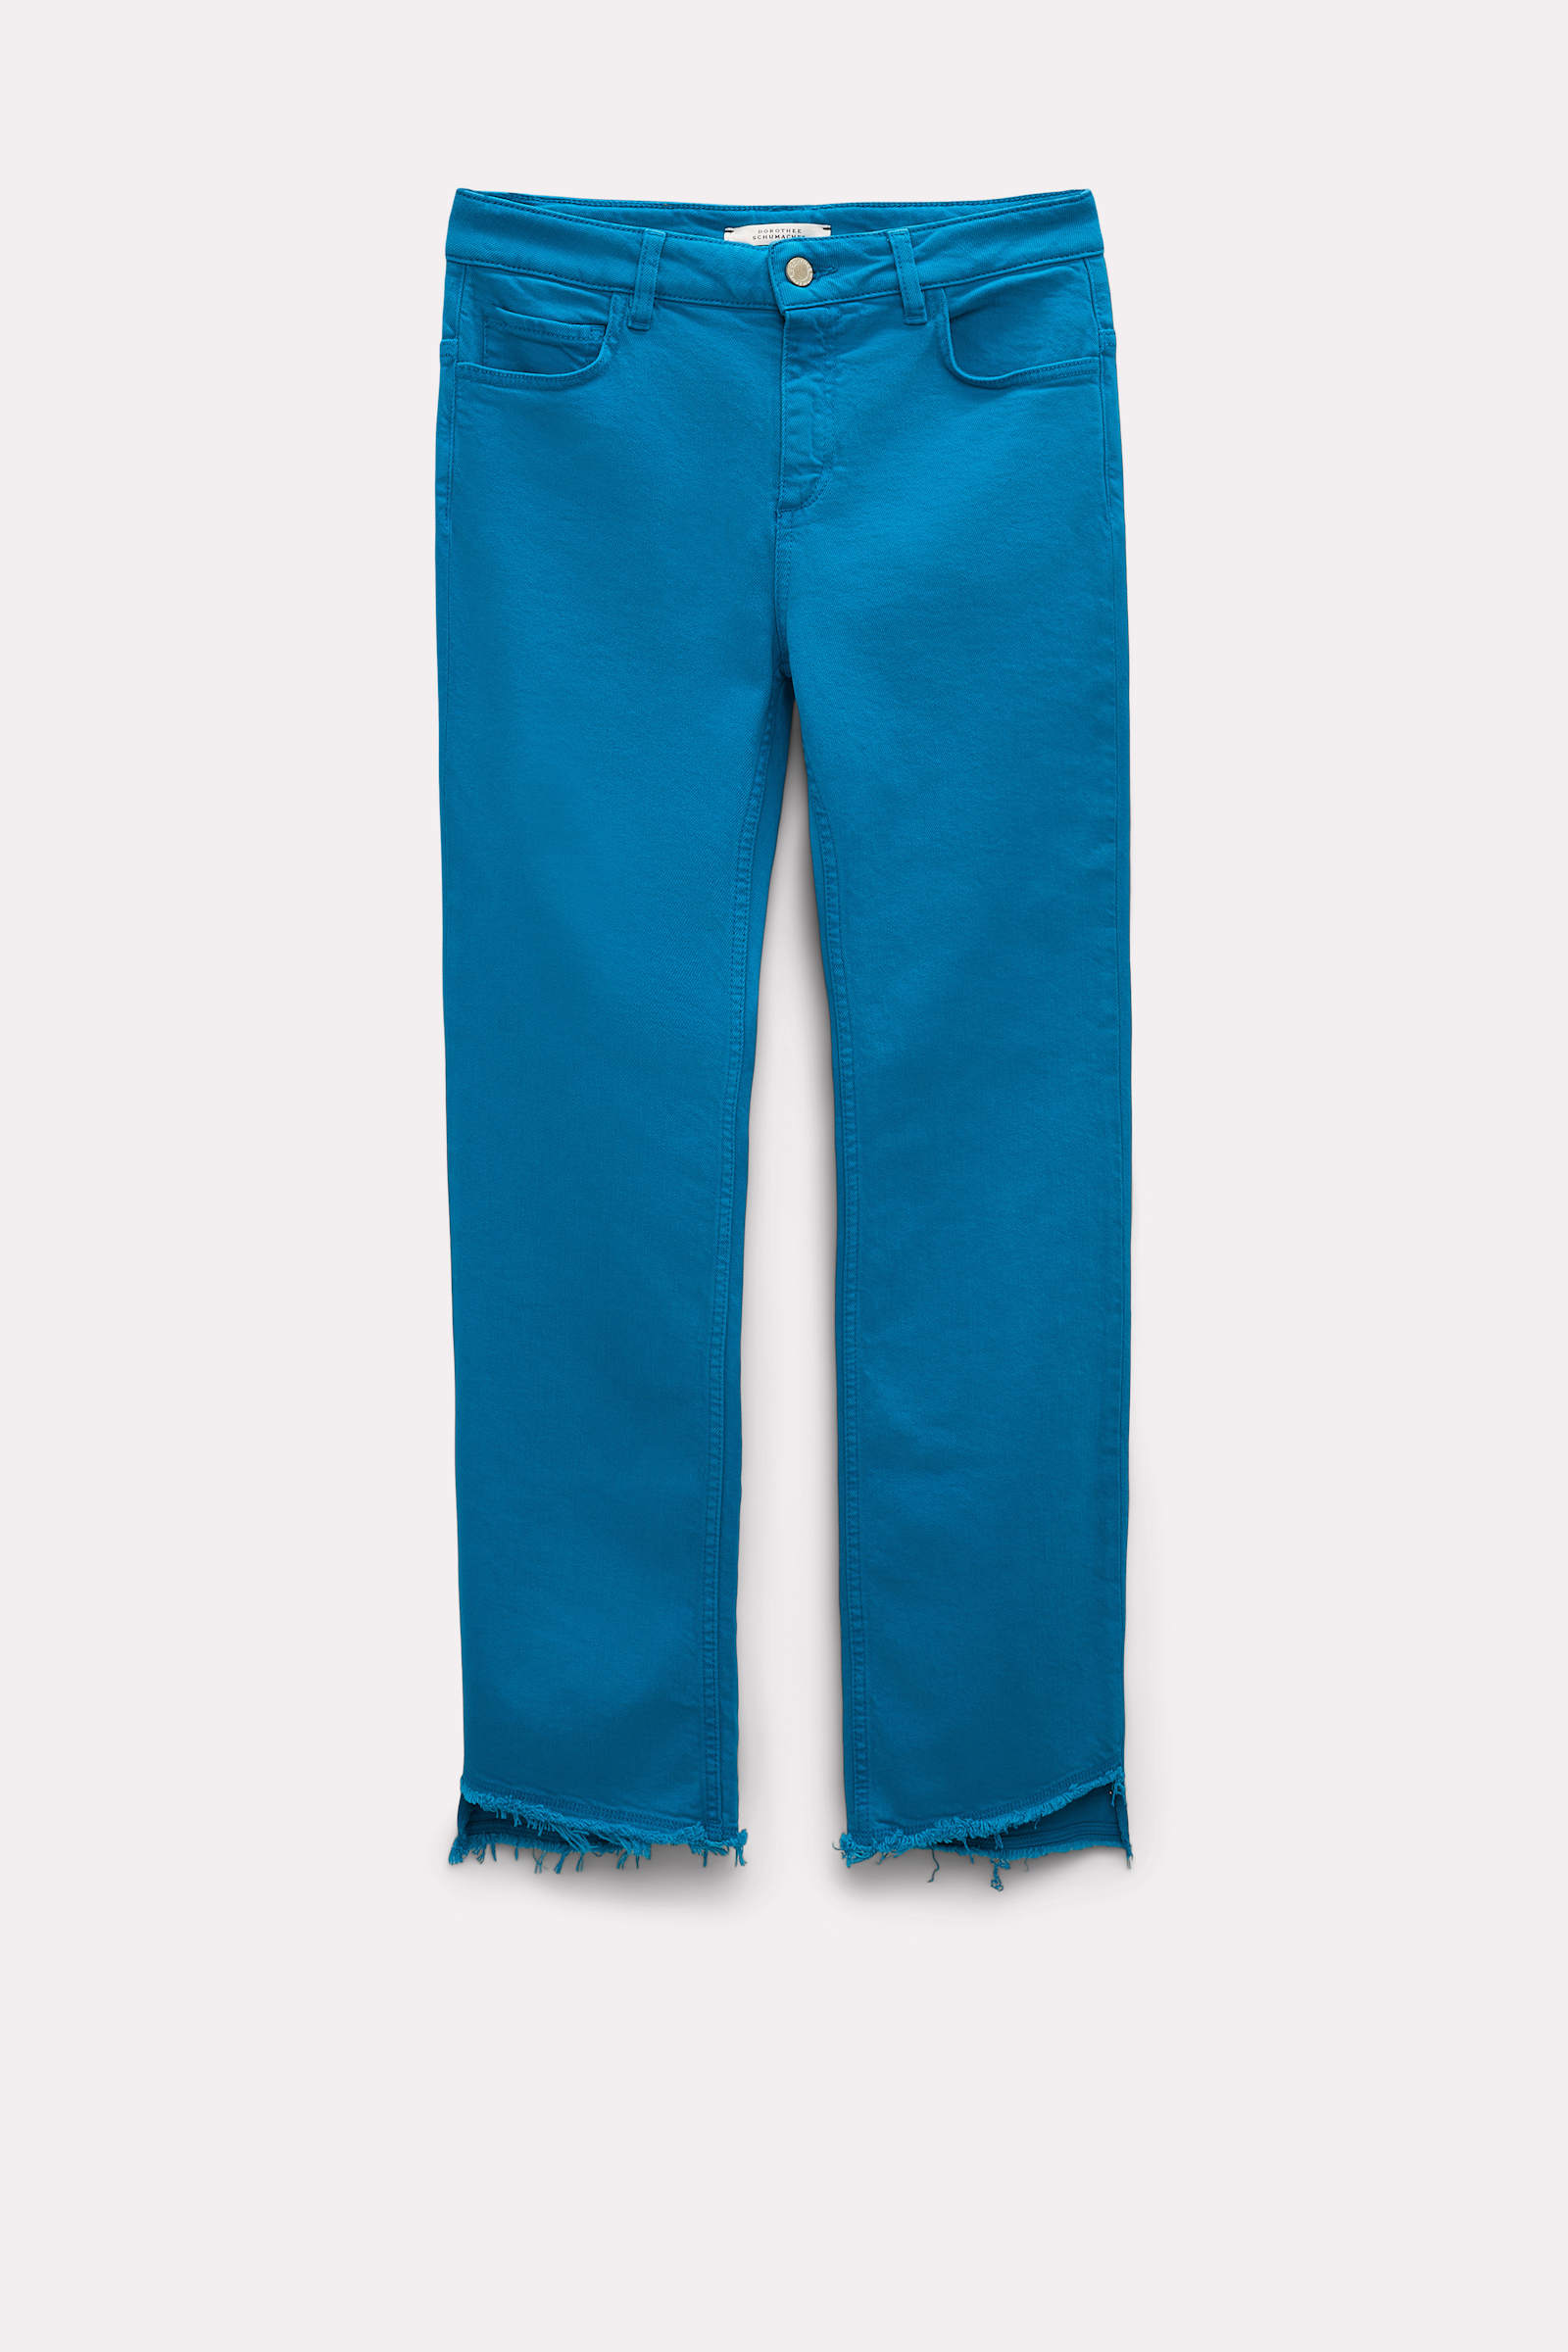 Dorothee Schumacher Flared ankle jeans with cutoff hem aqua blue